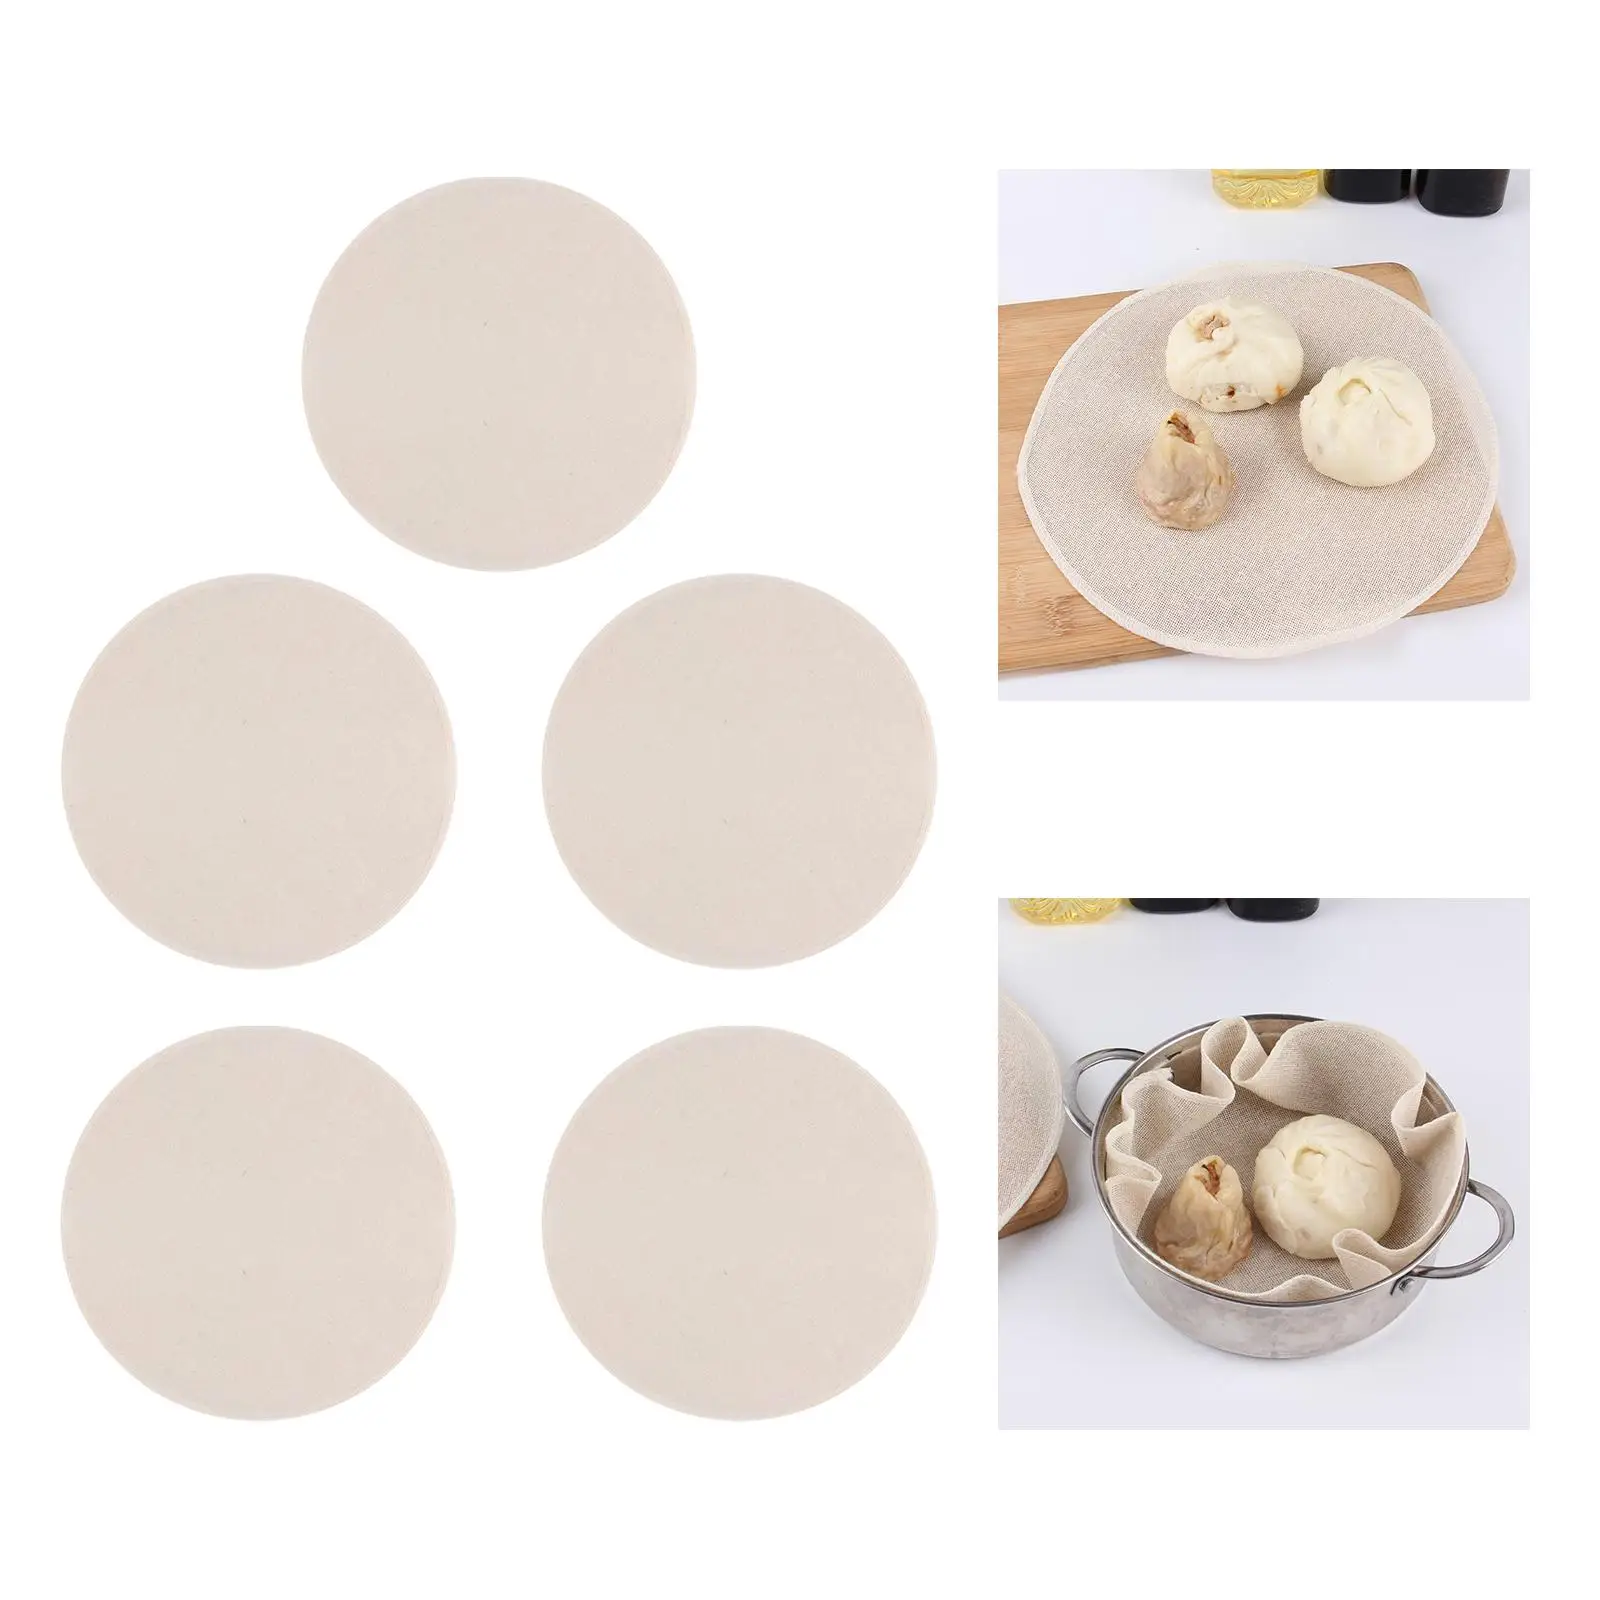 5x Non Stick Food Stuffed Bun Steamed Mat Breathable Steamer Liners Mesh Mat Pad for Dumplings Steamed Buns Dim Pastry Baking